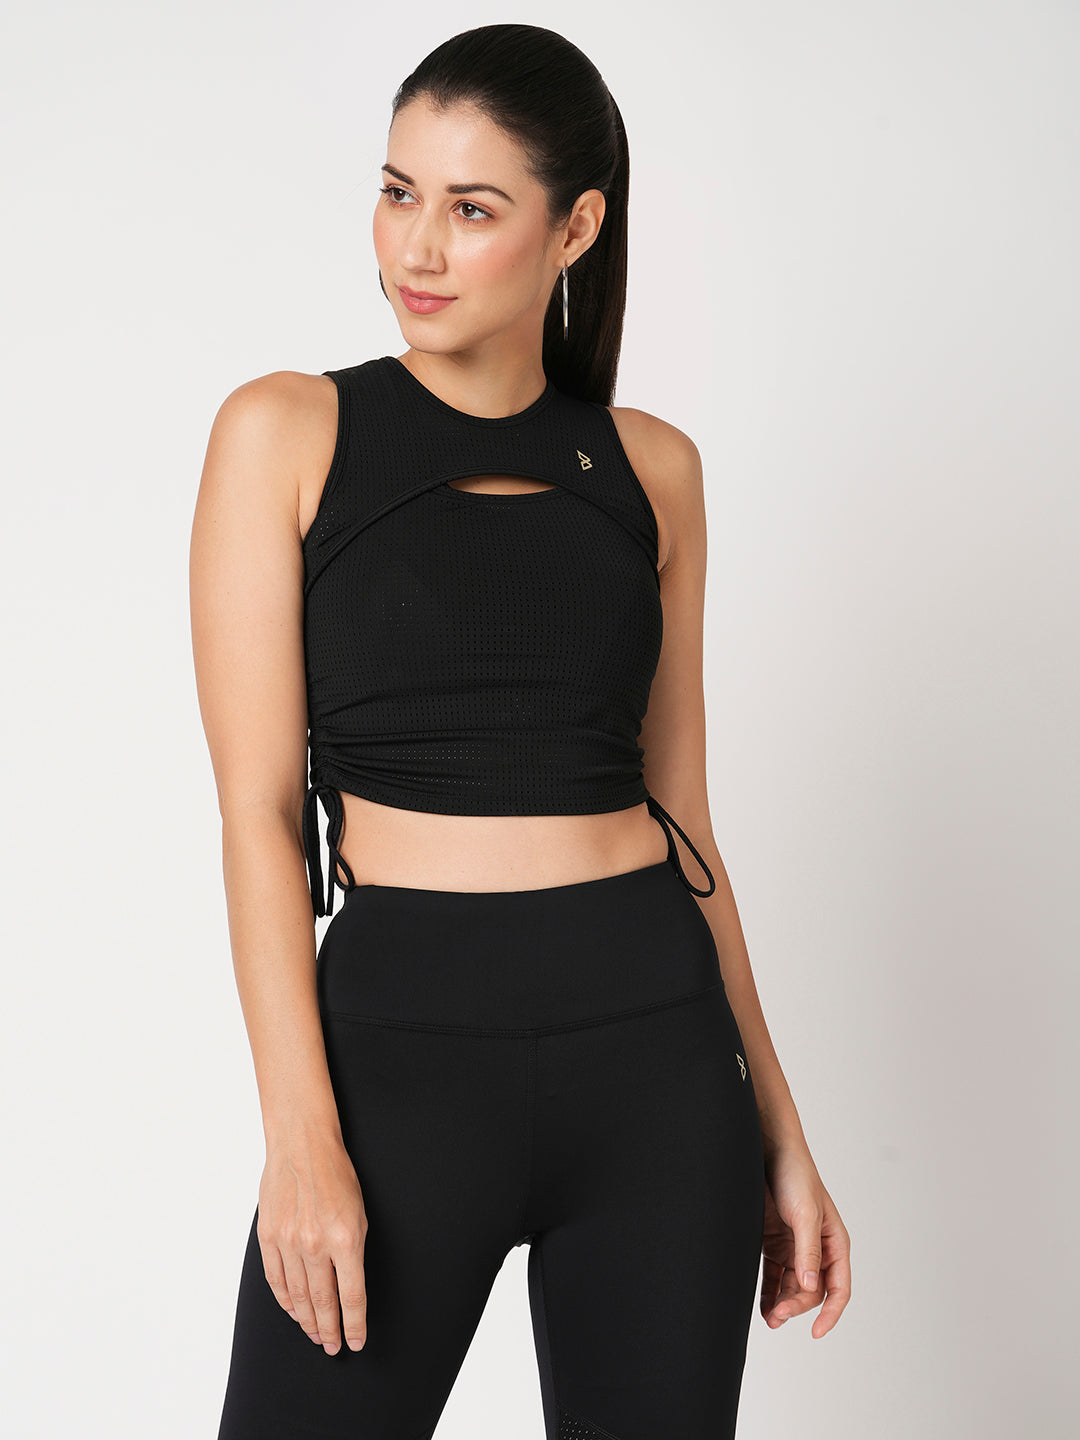 Black Mesh Rouched Top BODD ACTIVE